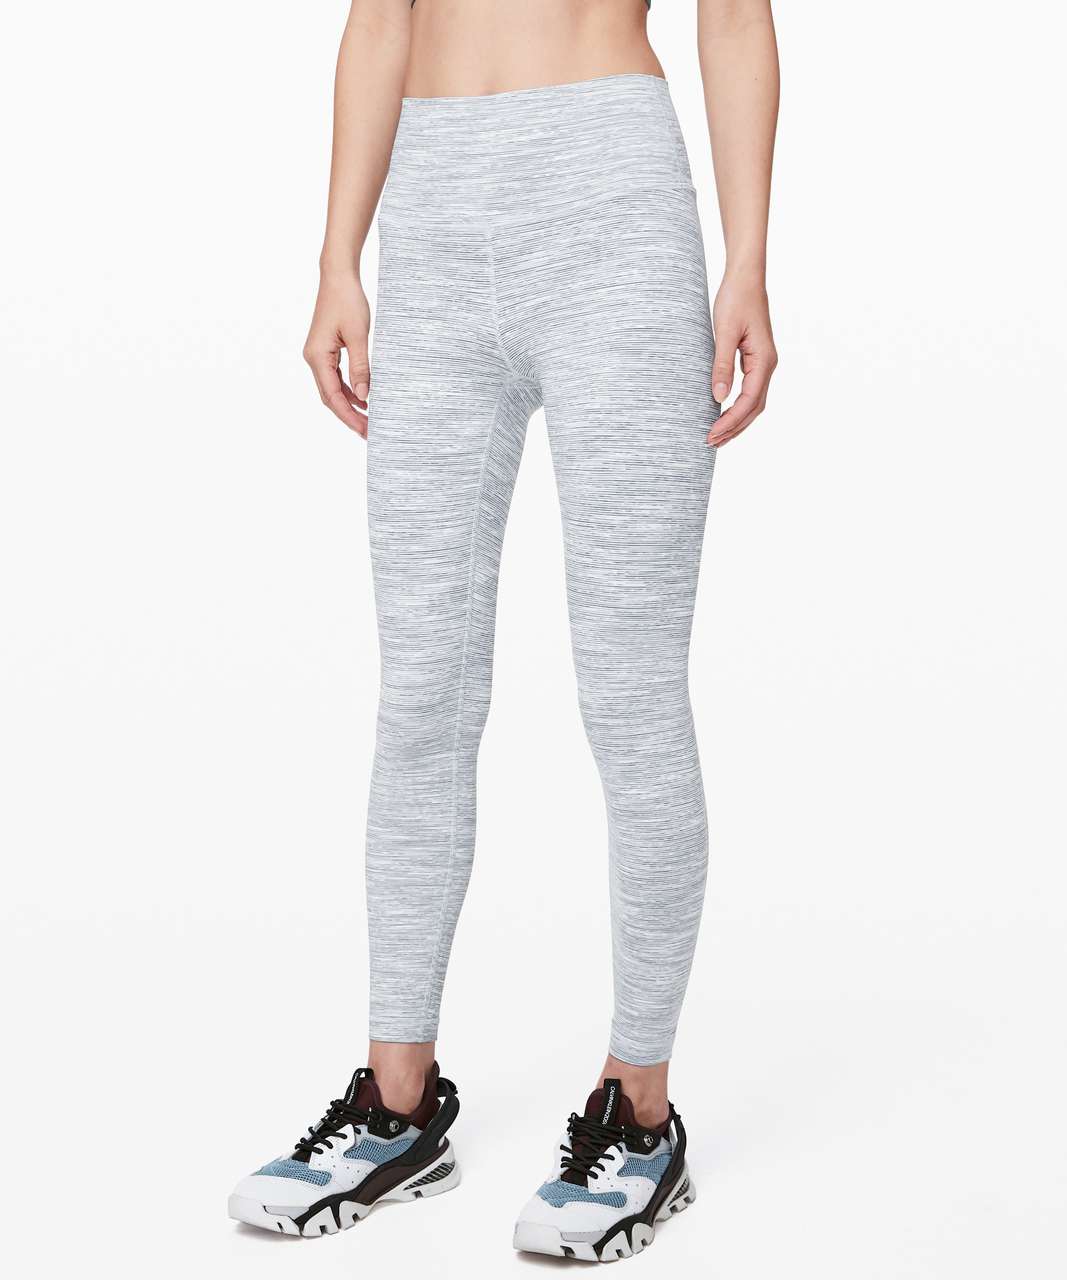 Lululemon Wunder Under High-Rise Tight 25" *Luxtreme - Wee Are From Space Sheer Blue Chambray